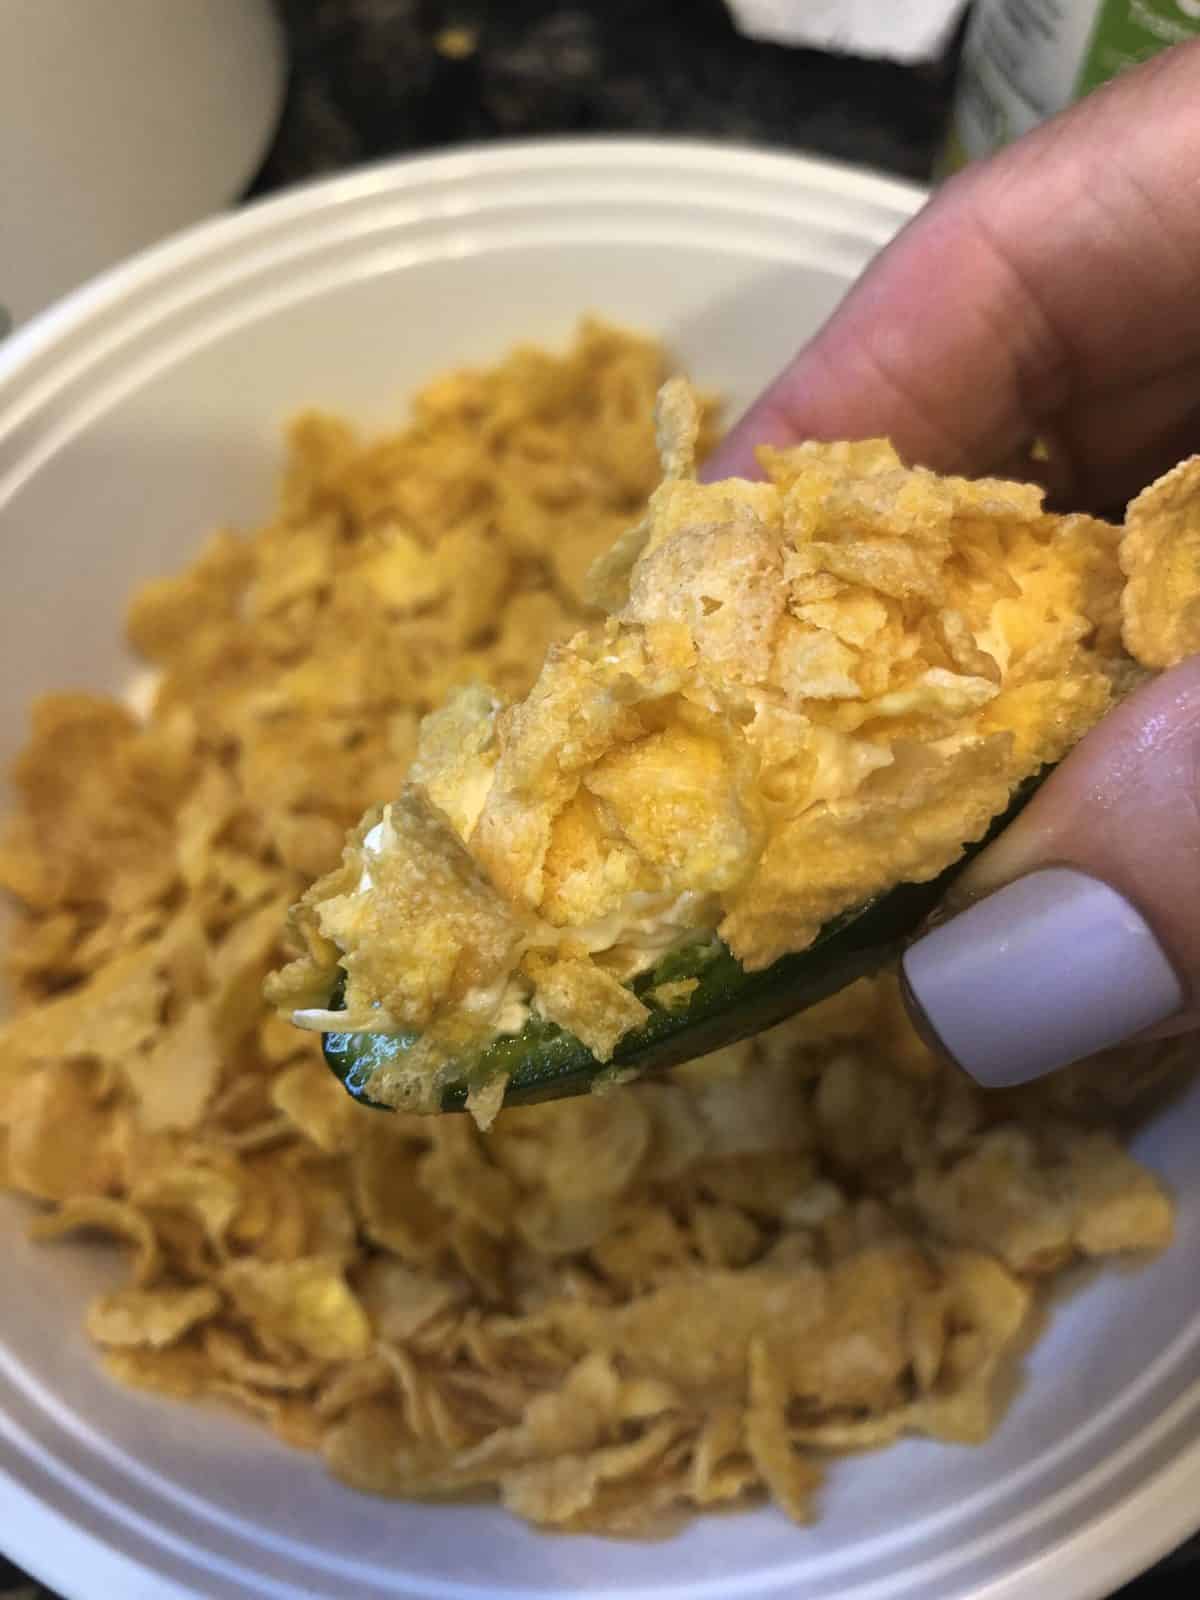 Cornflake Breaded Jalapeno Poppers being held in a hand with purple nail polish on nails over a bowl of corn flakes